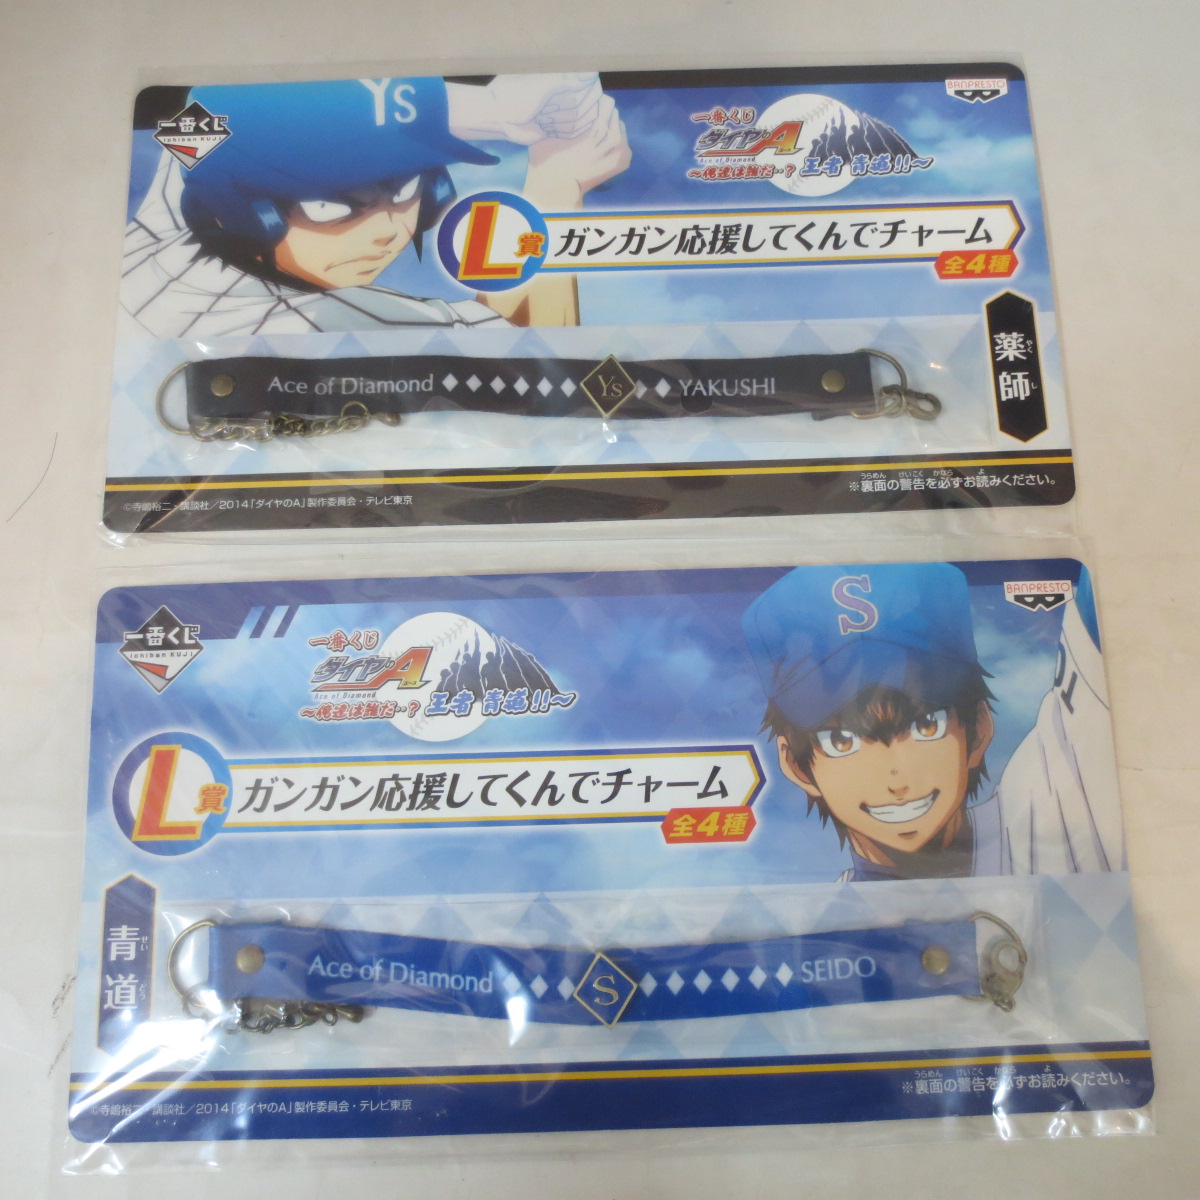 Ichiban Kuji Ace of Diamond -Who are we?- [Prize L] Cheering Charm